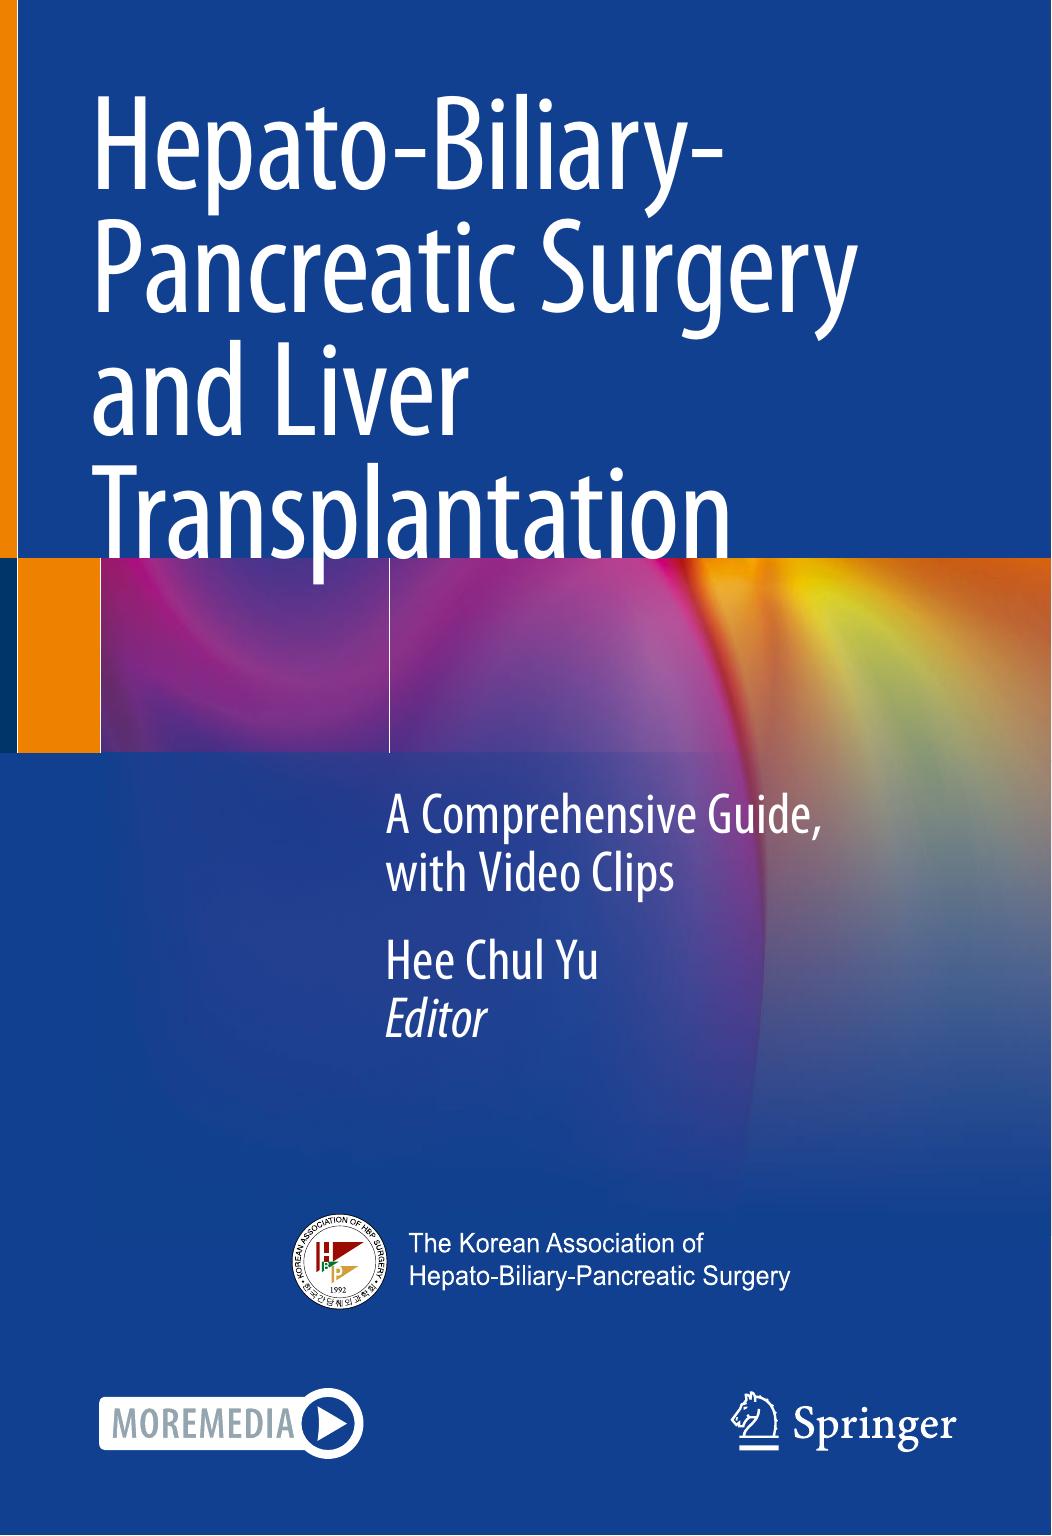 Hepato-Biliary-Pancreatic Surgery and Liver Transplantation: A Comprehensive Guide, with Video Clips by Hee Chul Yu